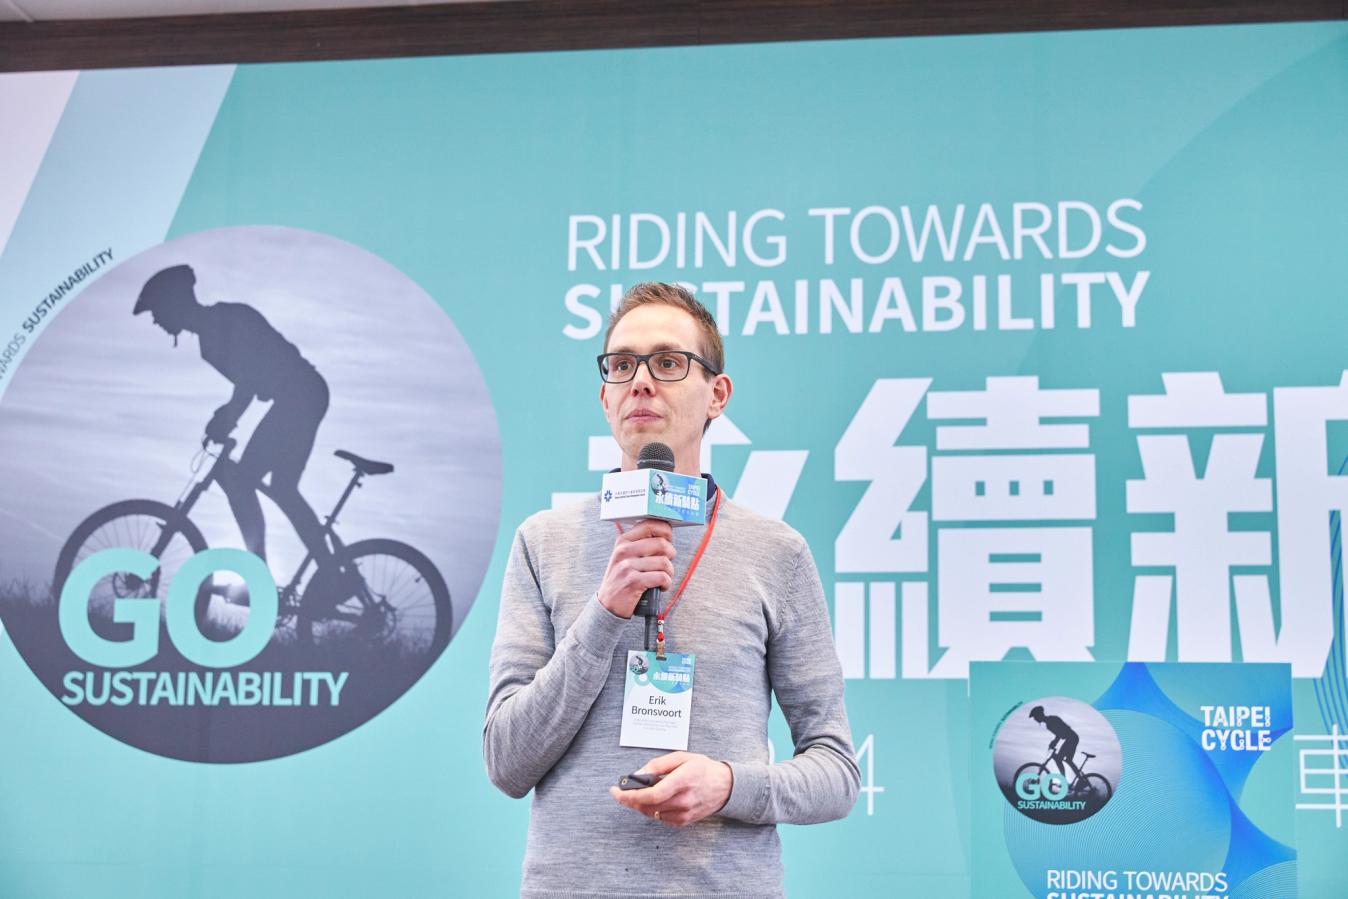 Erik Bronsvoort during a workshop at the Taipei Cycle Show